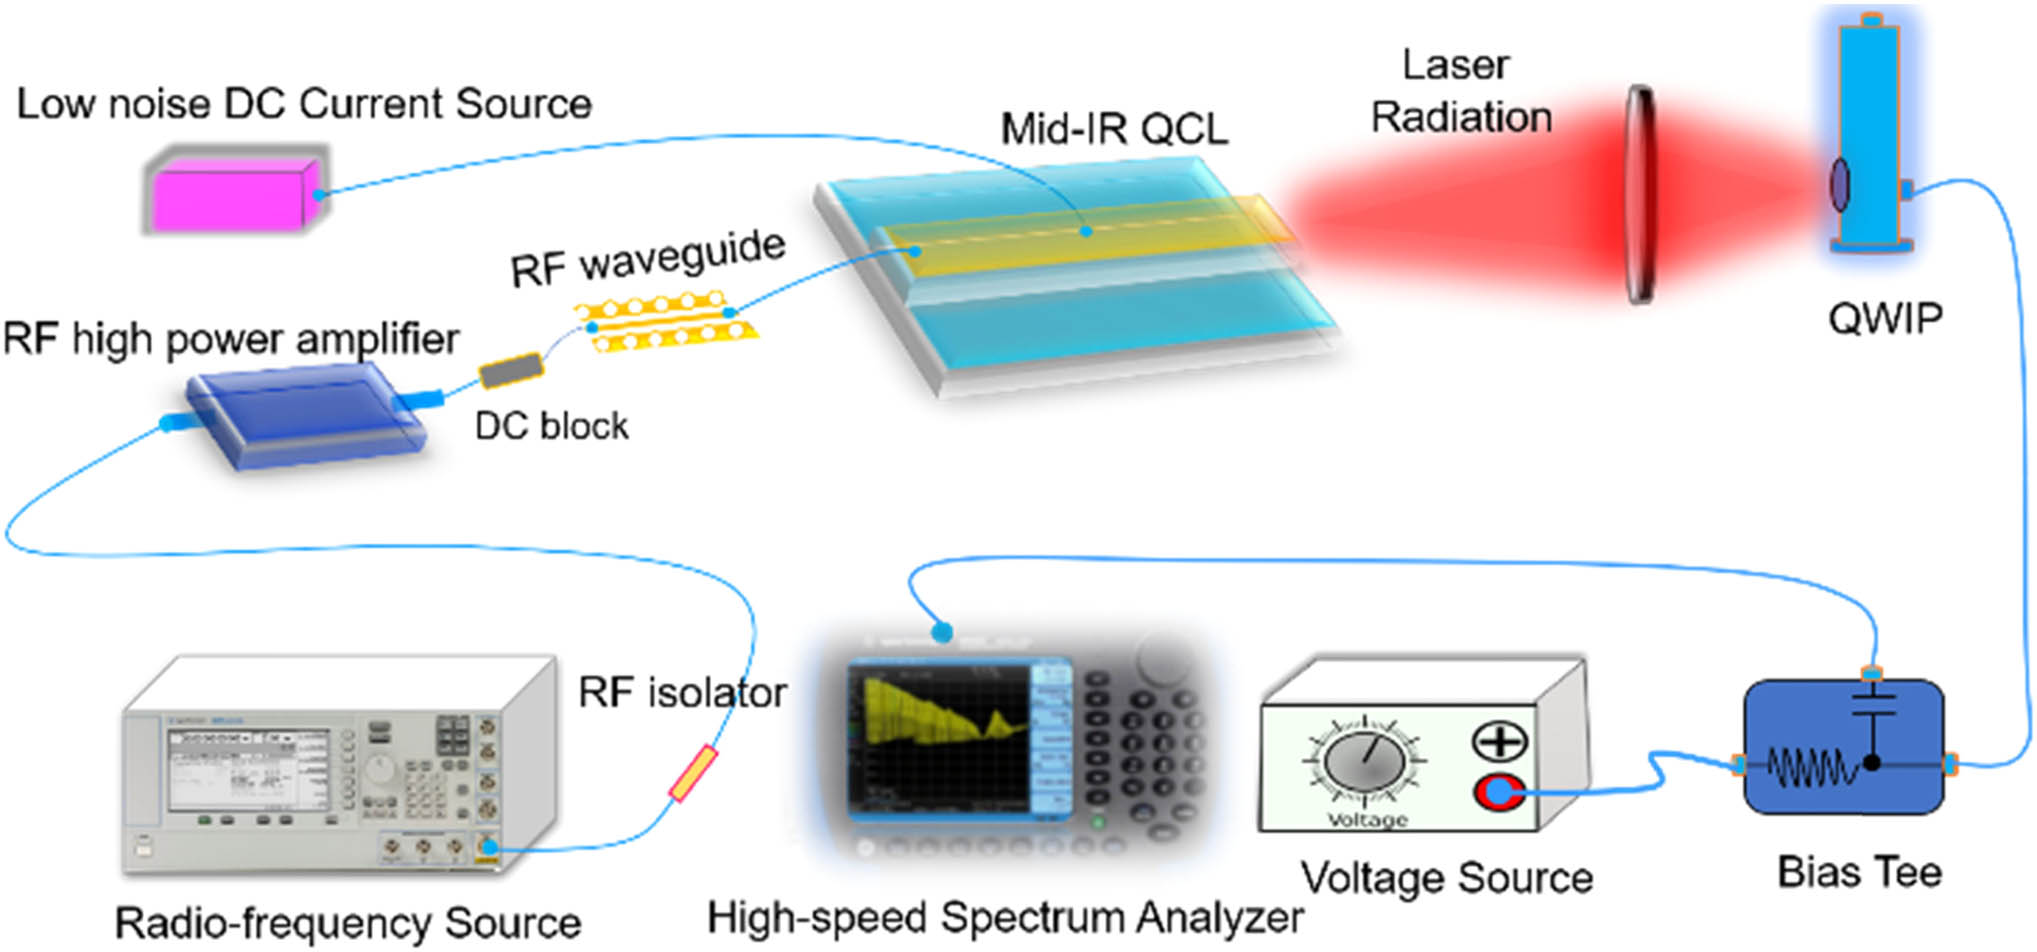 Experimental setup. The mid-infrared QCL is biased by a low-noise DC current source. Laser emission is coupled into a quantum well infrared photodetector (QWIP). The high frequency components of the photocurrents are coupled into a spectrum analyzer. RF waves are generated by a RF generator and amplified by a high-power amplifier. The RF signal is injected into the QCL through a high-speed RF waveguide from near the back facet of the QCL.